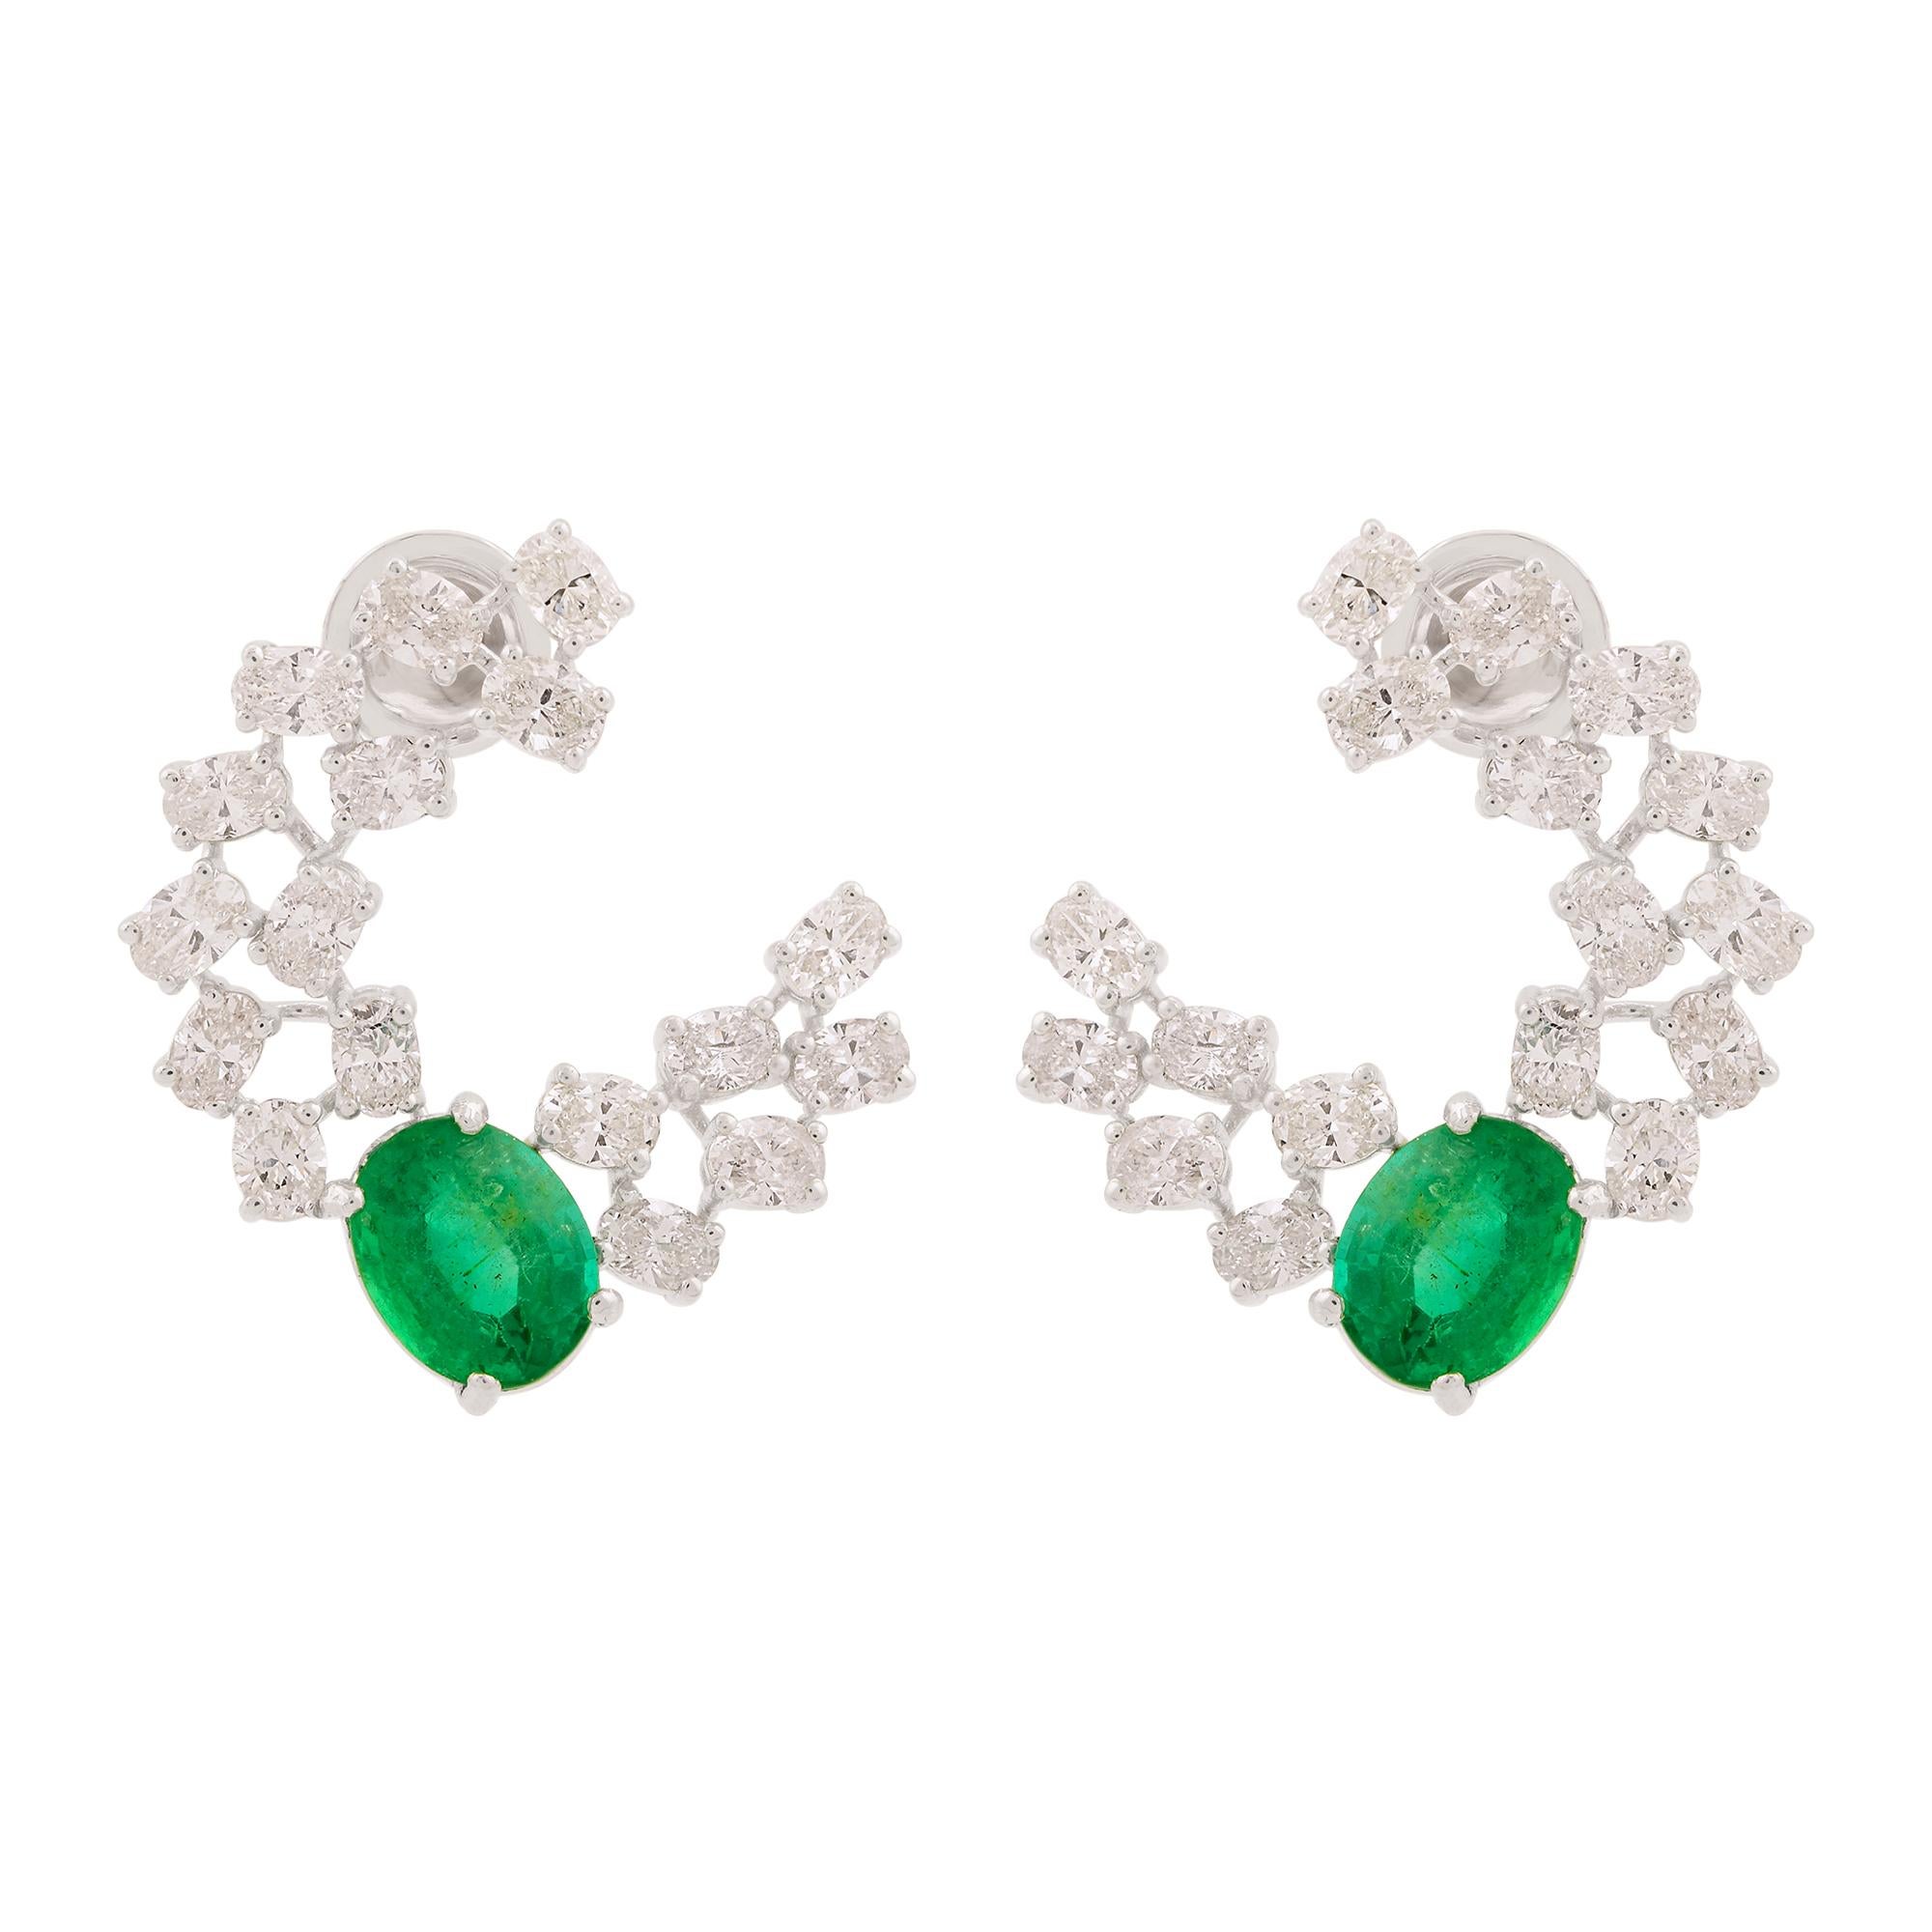 Item Code:- SEE-11729 (14k)
Gross Weight :- 7.05 gm
14k Solid White Gold Weight :- 5.05 gm
Natural Diamond Weight :- 3.96 ct.  ( AVERAGE DIAMOND CLARITY SI1-SI2 & COLOR H-I )
Zambian Emerald Weight :- 6 ct.
Earrings Size : 24 mm (approx.)

✦